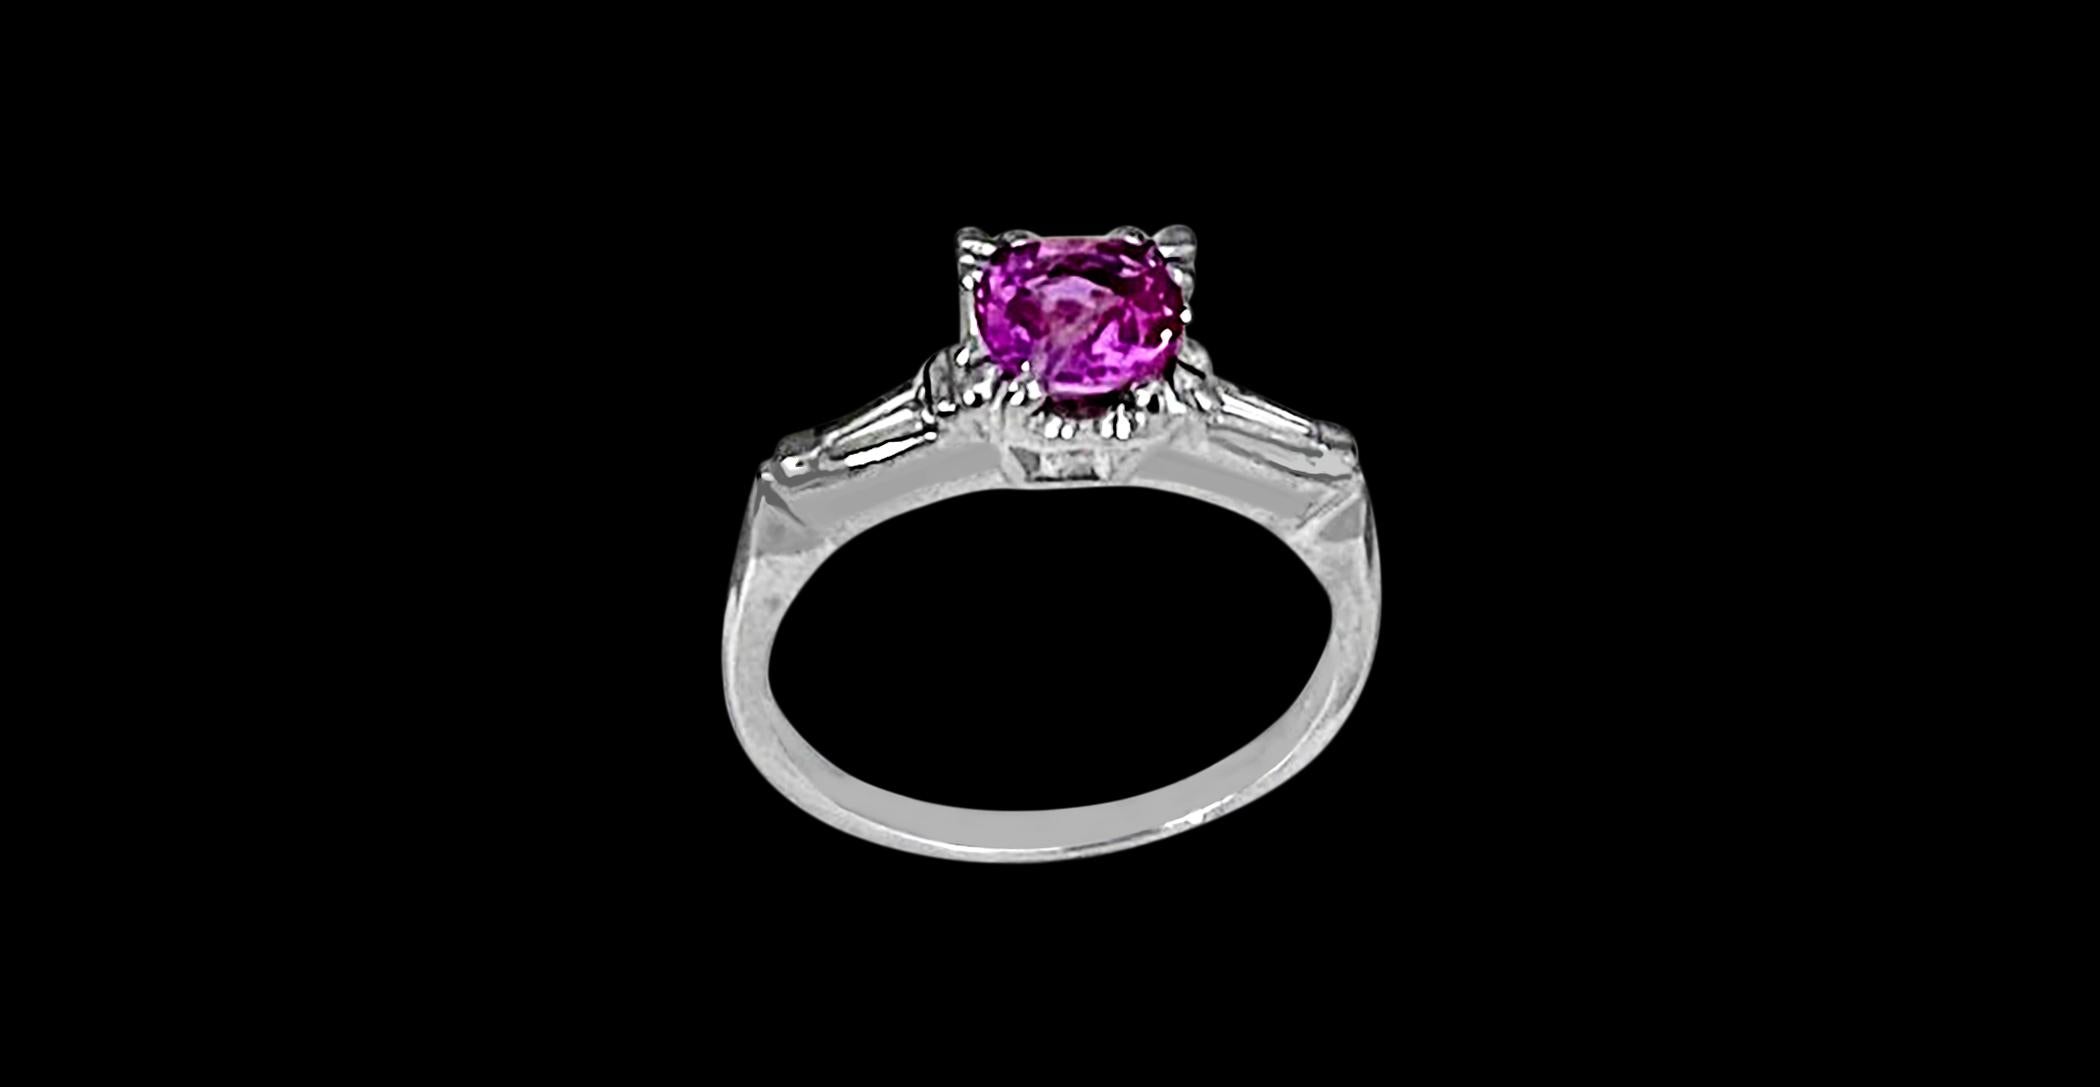 A classic, Ring 
weight of 1 Ct natural Pink sapphire and two Baguettes  Diamond  Ring made in platinum
1 diamond Baguette on each side of the pink sapphire.
Natural Pink Sapphire in  Round  shape , Pretty color, luster is amazing and  have very